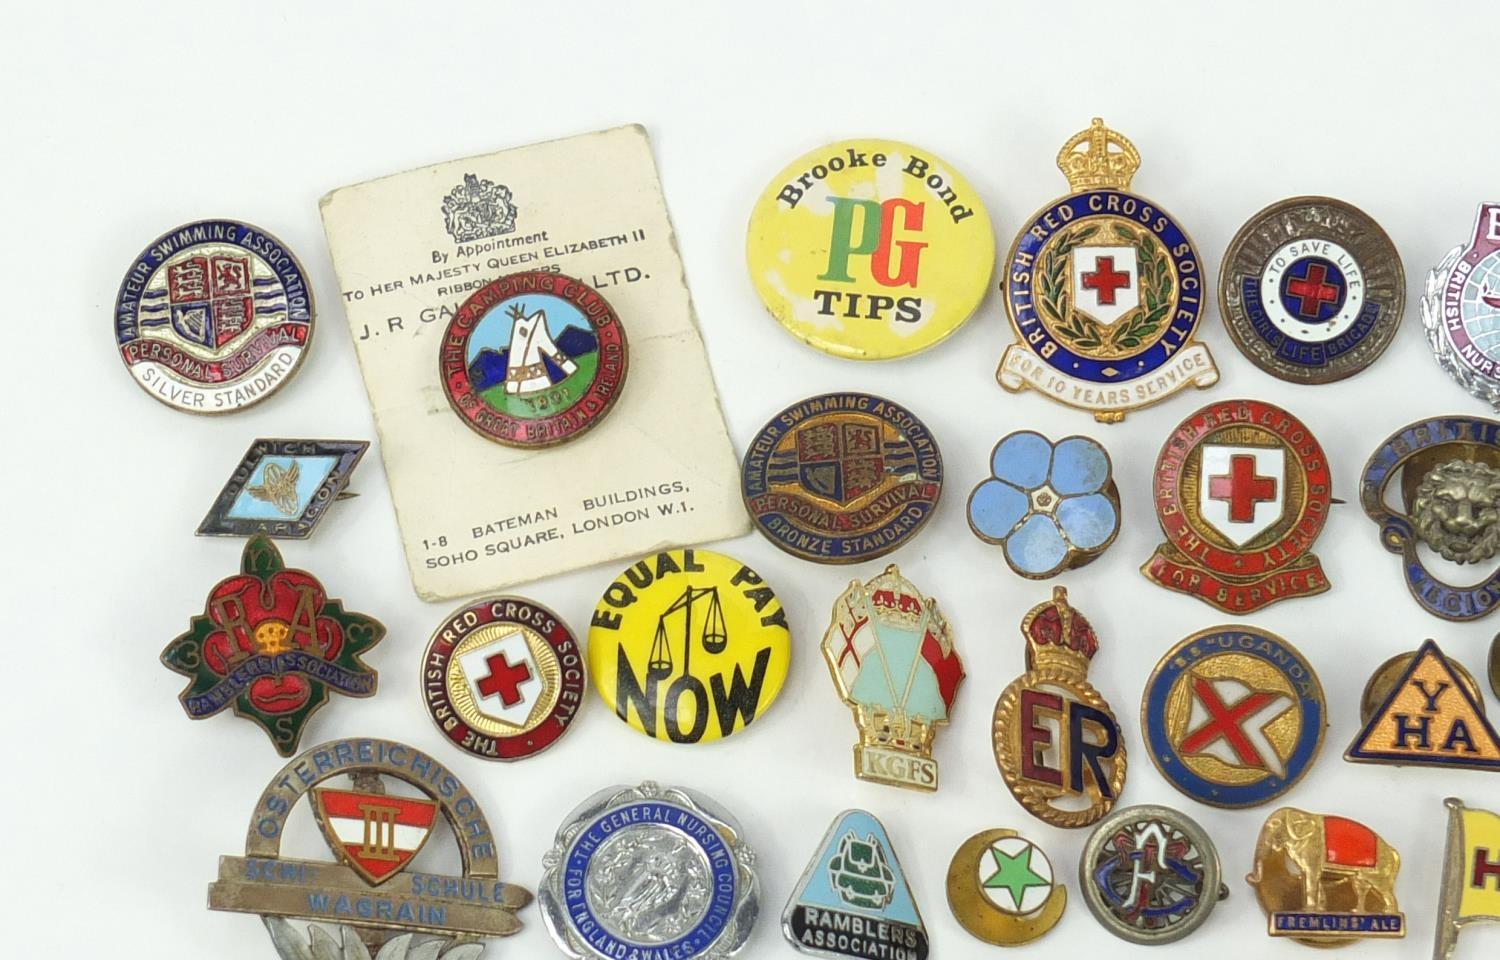 Vintage badges and lapels, some military interest including American World War II sterling silver - Image 2 of 10